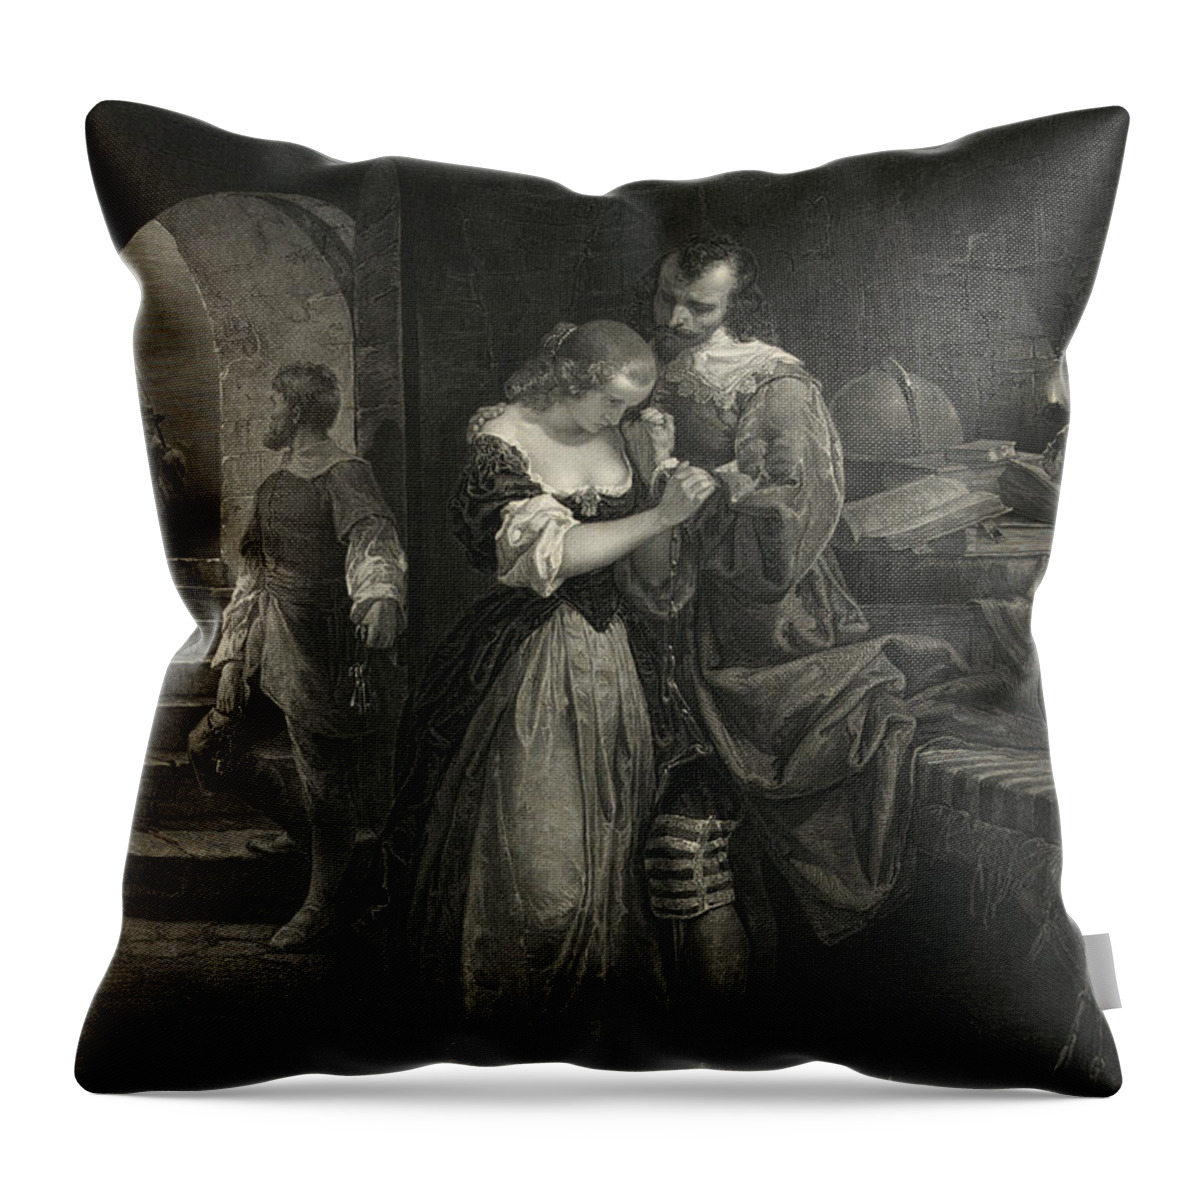 https://render.fineartamerica.com/images/rendered/default/throw-pillow/images-medium/raleigh-parting-with-wife-16th-century-photo-researchers.jpg?&targetx=0&targety=-79&imagewidth=478&imageheight=637&modelwidth=479&modelheight=479&backgroundcolor=24231C&orientation=0&producttype=throwpillow-14-14